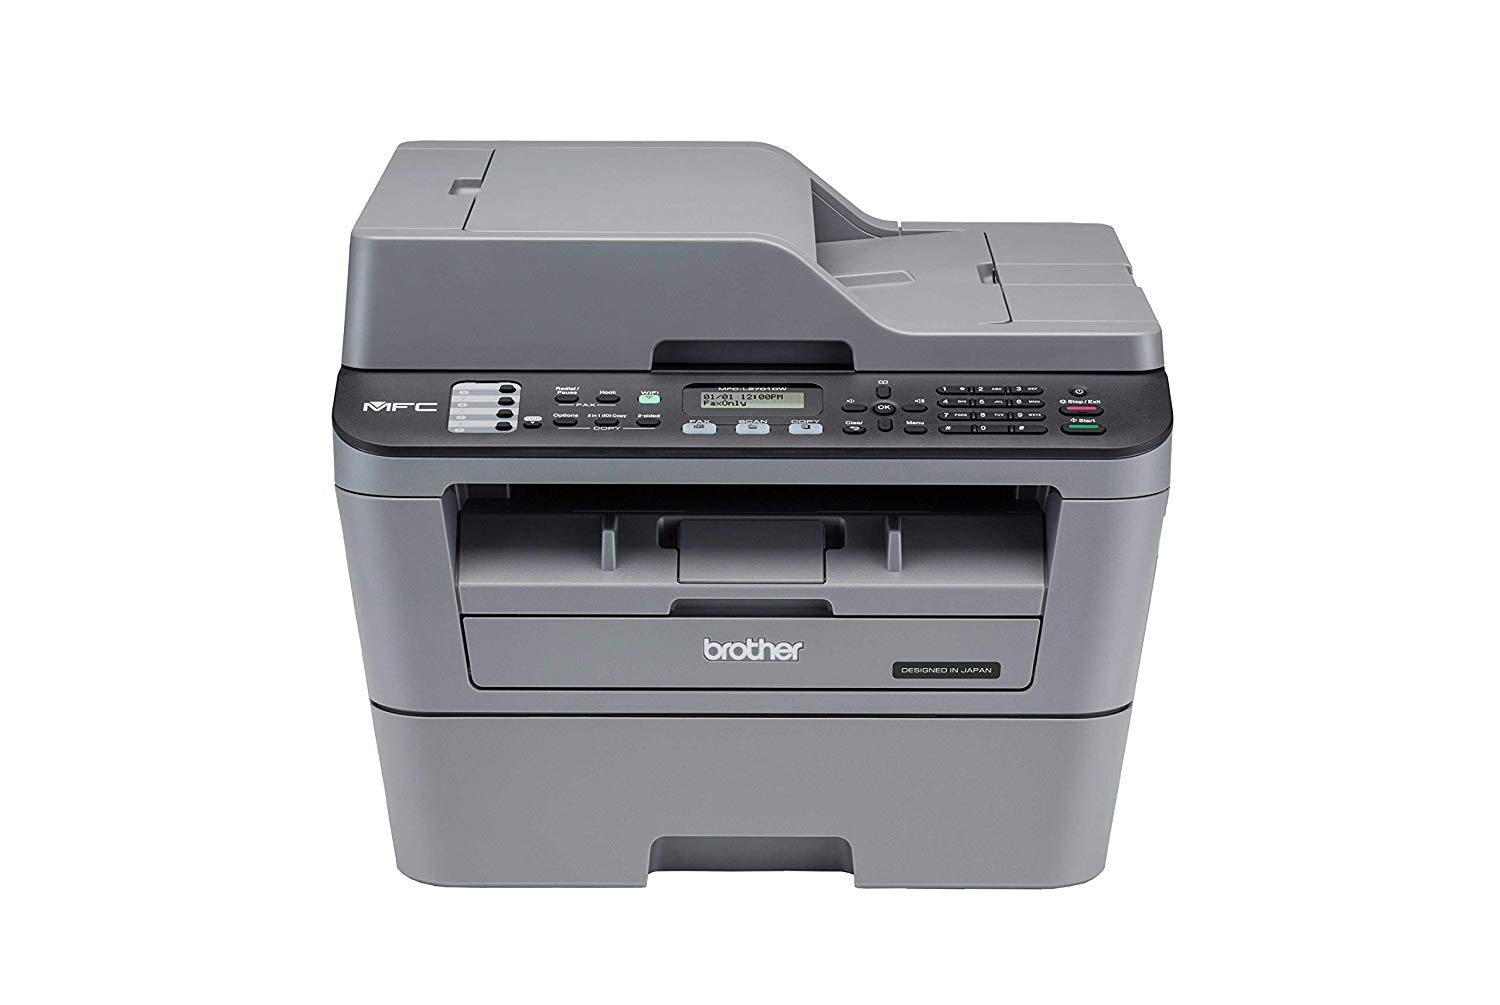 Brother Monocrom Laser Multi-Function Printer MFC-L2701DW Print, Scan, Copy, Fax, 30 PPM, 32 MB Memory, 35 Sheet ADF with Duplex, Wi-Fi & Wired Network, 35 sheet ADF